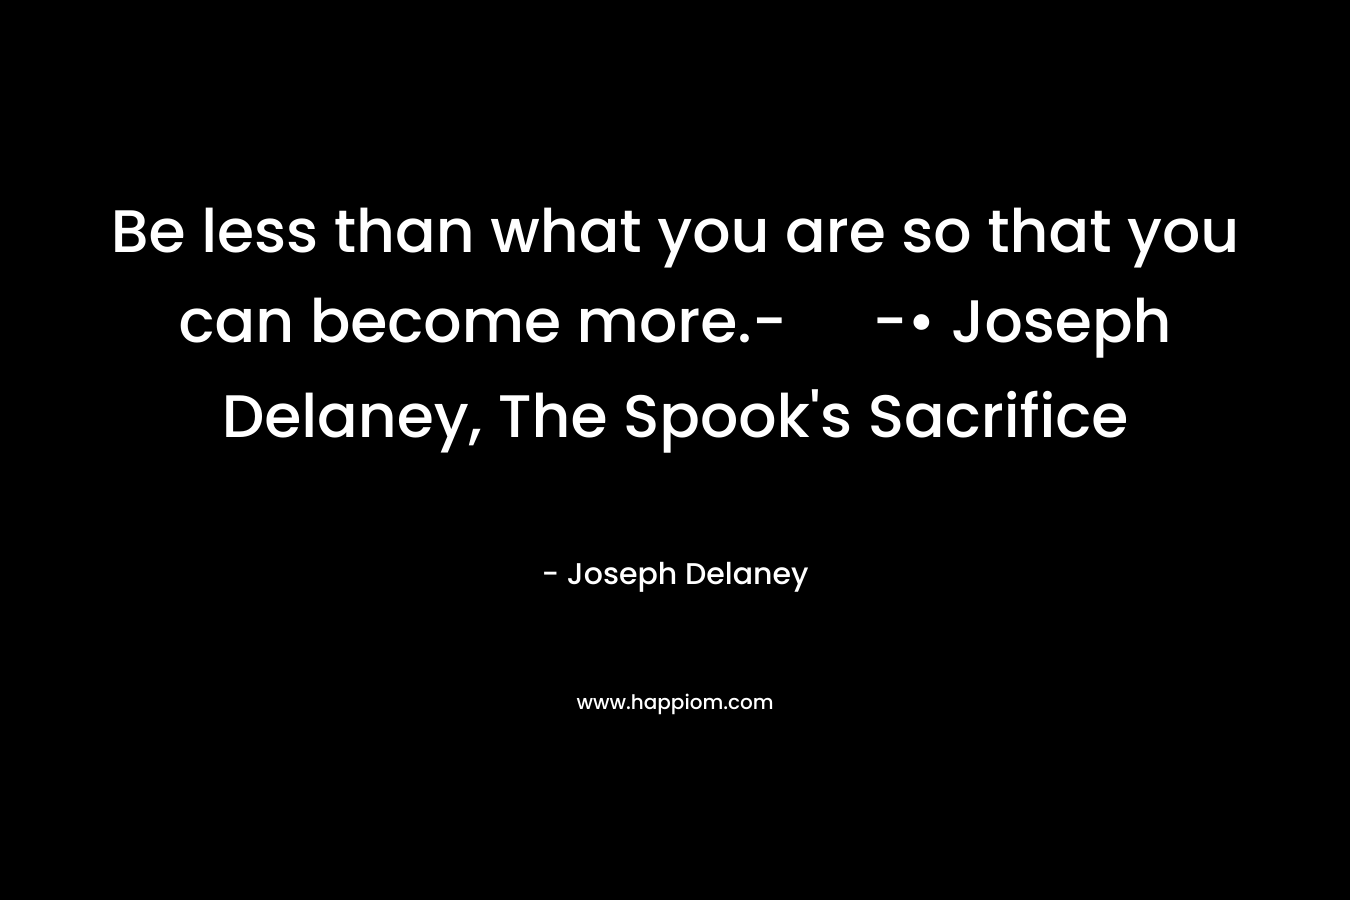 Be less than what you are so that you can become more.- -• Joseph Delaney, The Spook’s Sacrifice – Joseph Delaney